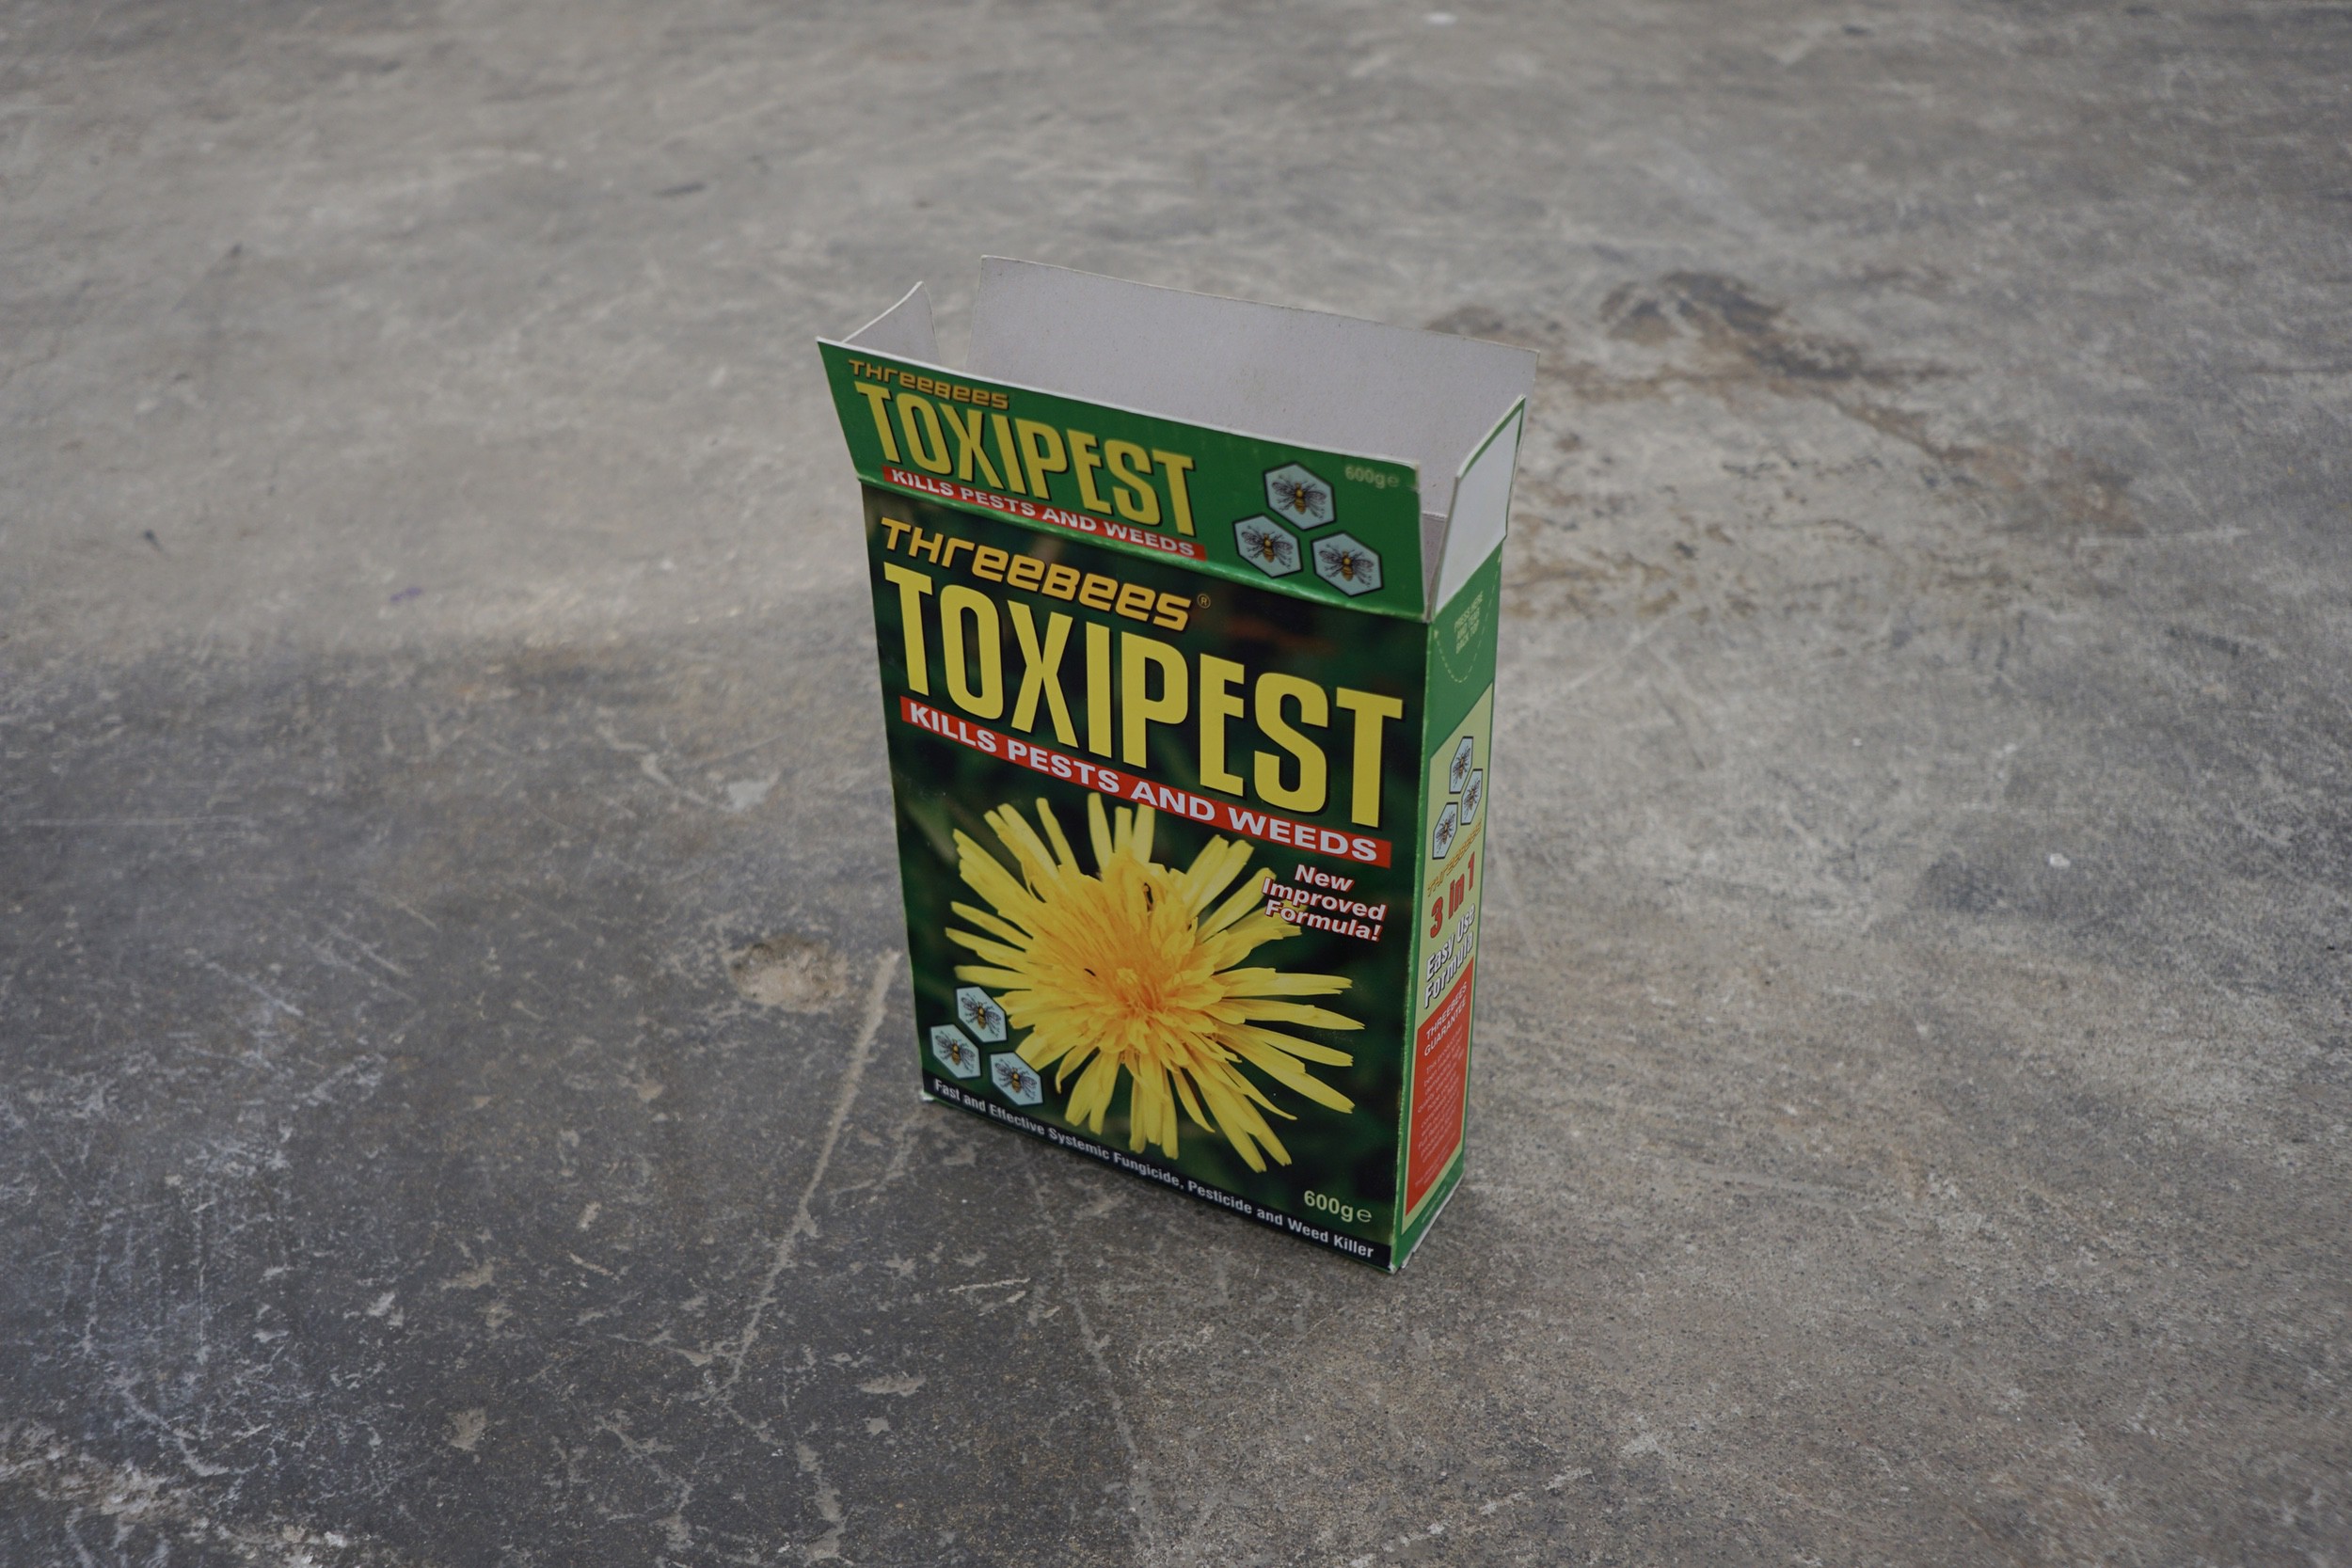  Anthony Discenza  Untitled (Pesticide) , 2017 Custom fabricated “Toxi-pest” cardboard pesticide box used in production of 2004 film  The Constant Gardener  